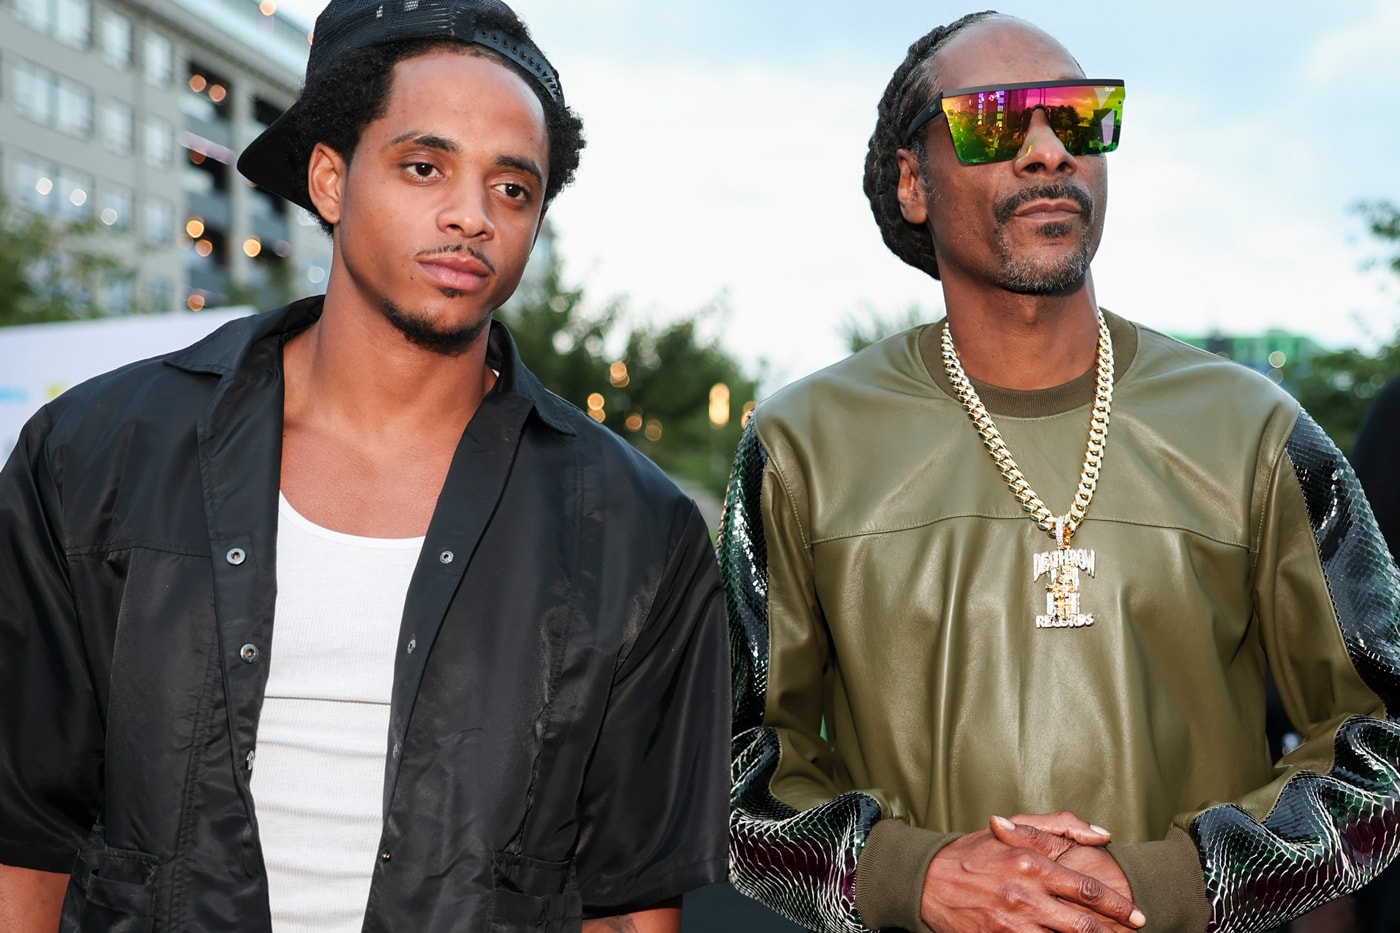 Snoop Dogg and Son Launching Death Row Games